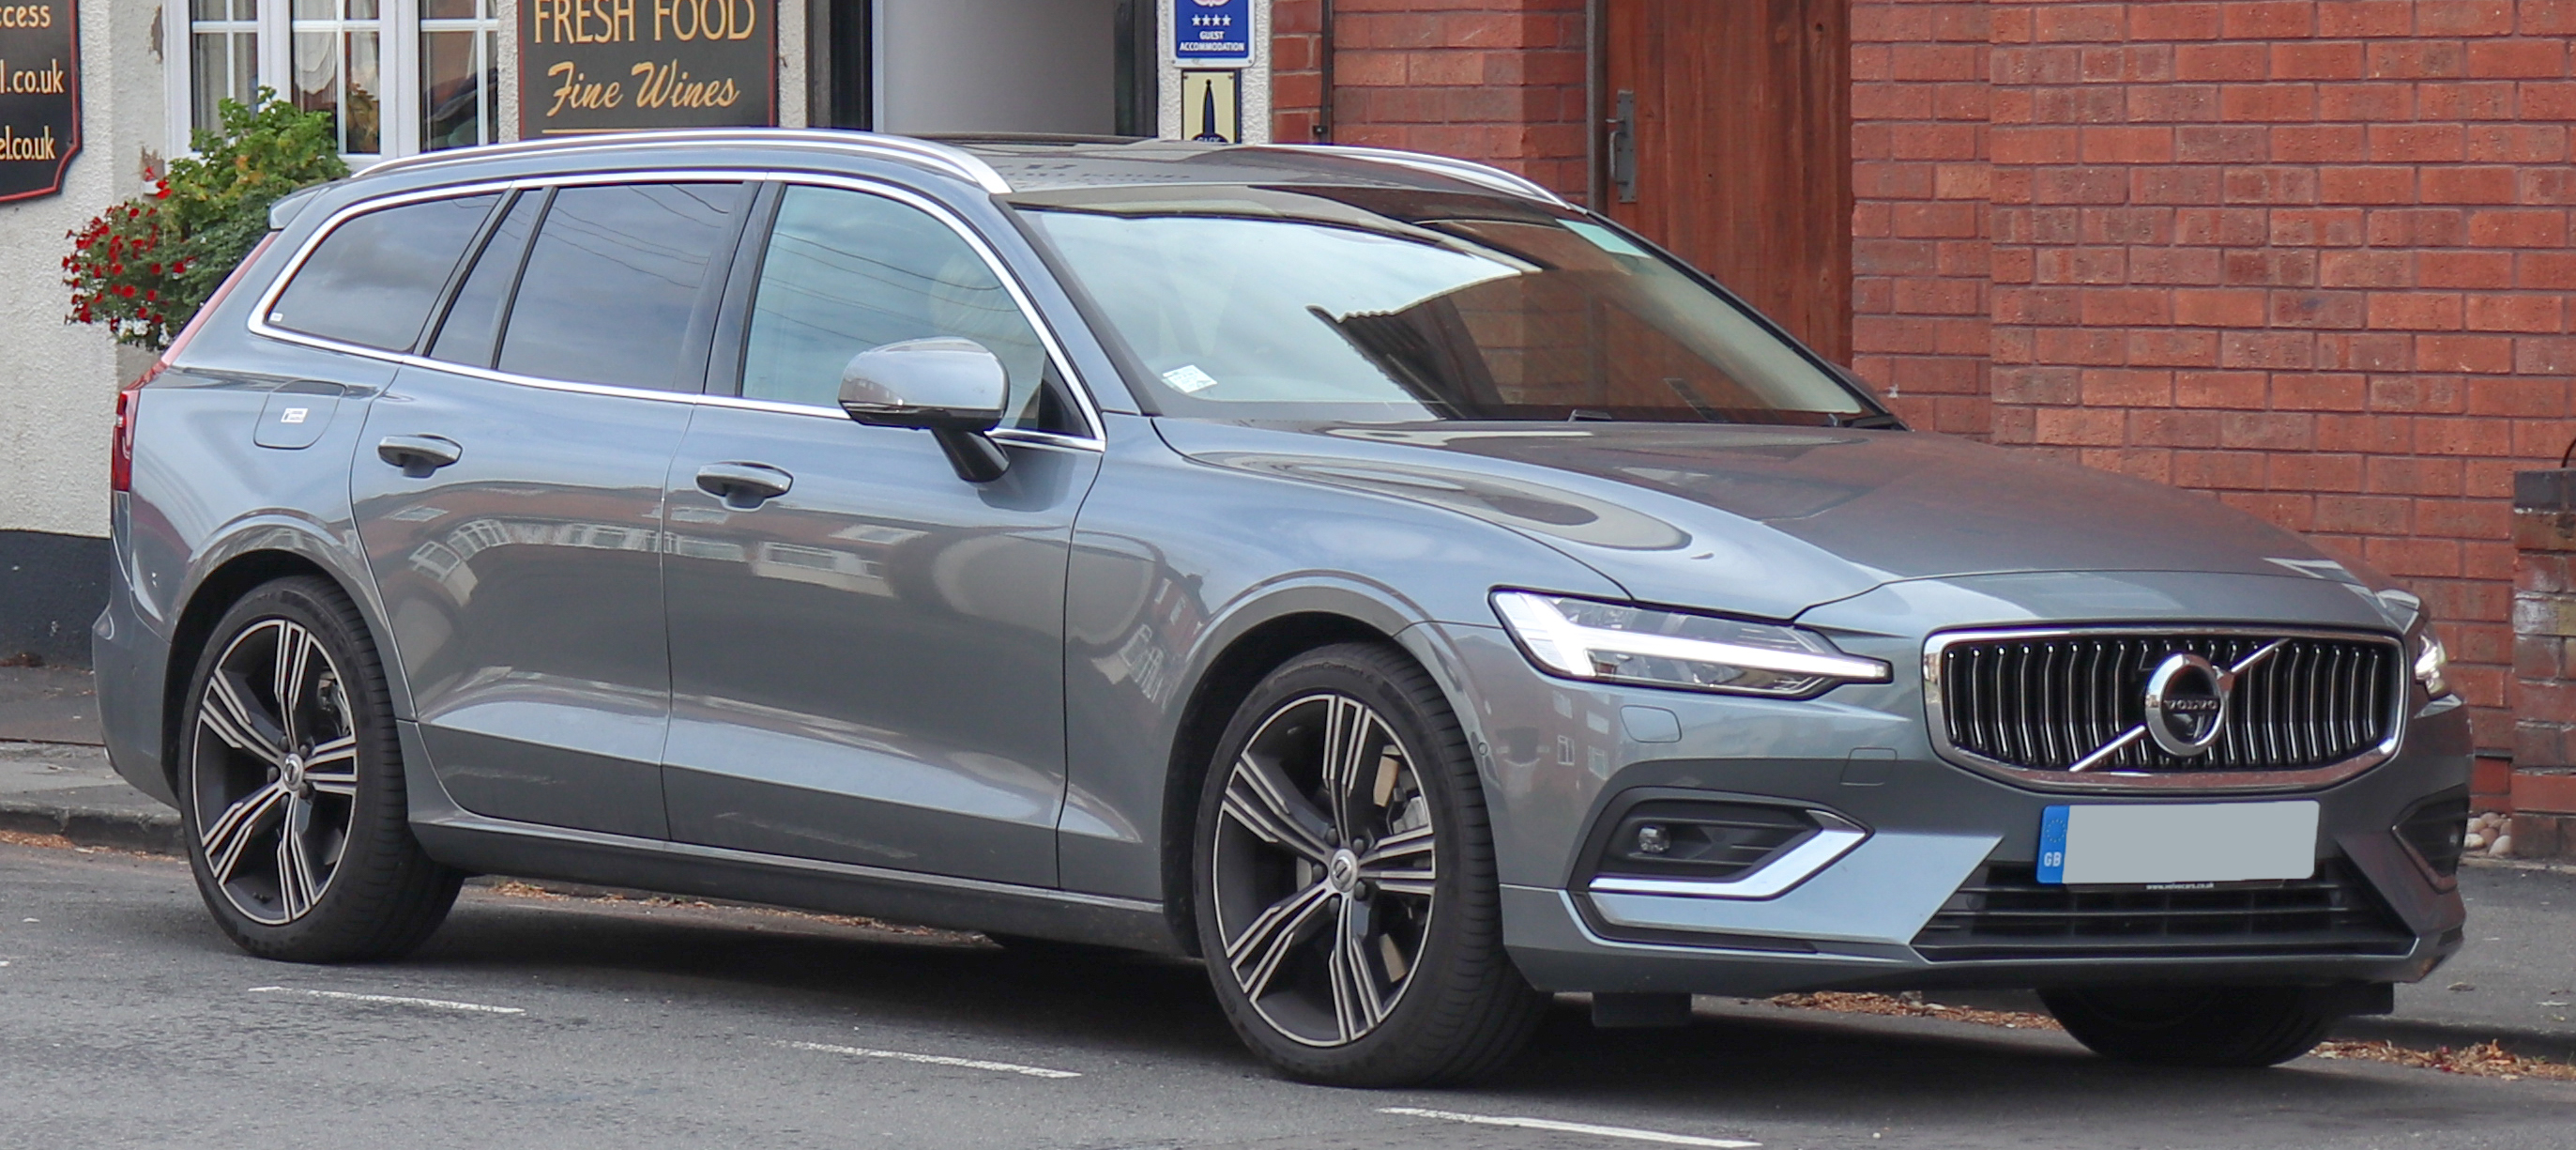 Which Used Year Model of Volvo V60 Is The Best Value?